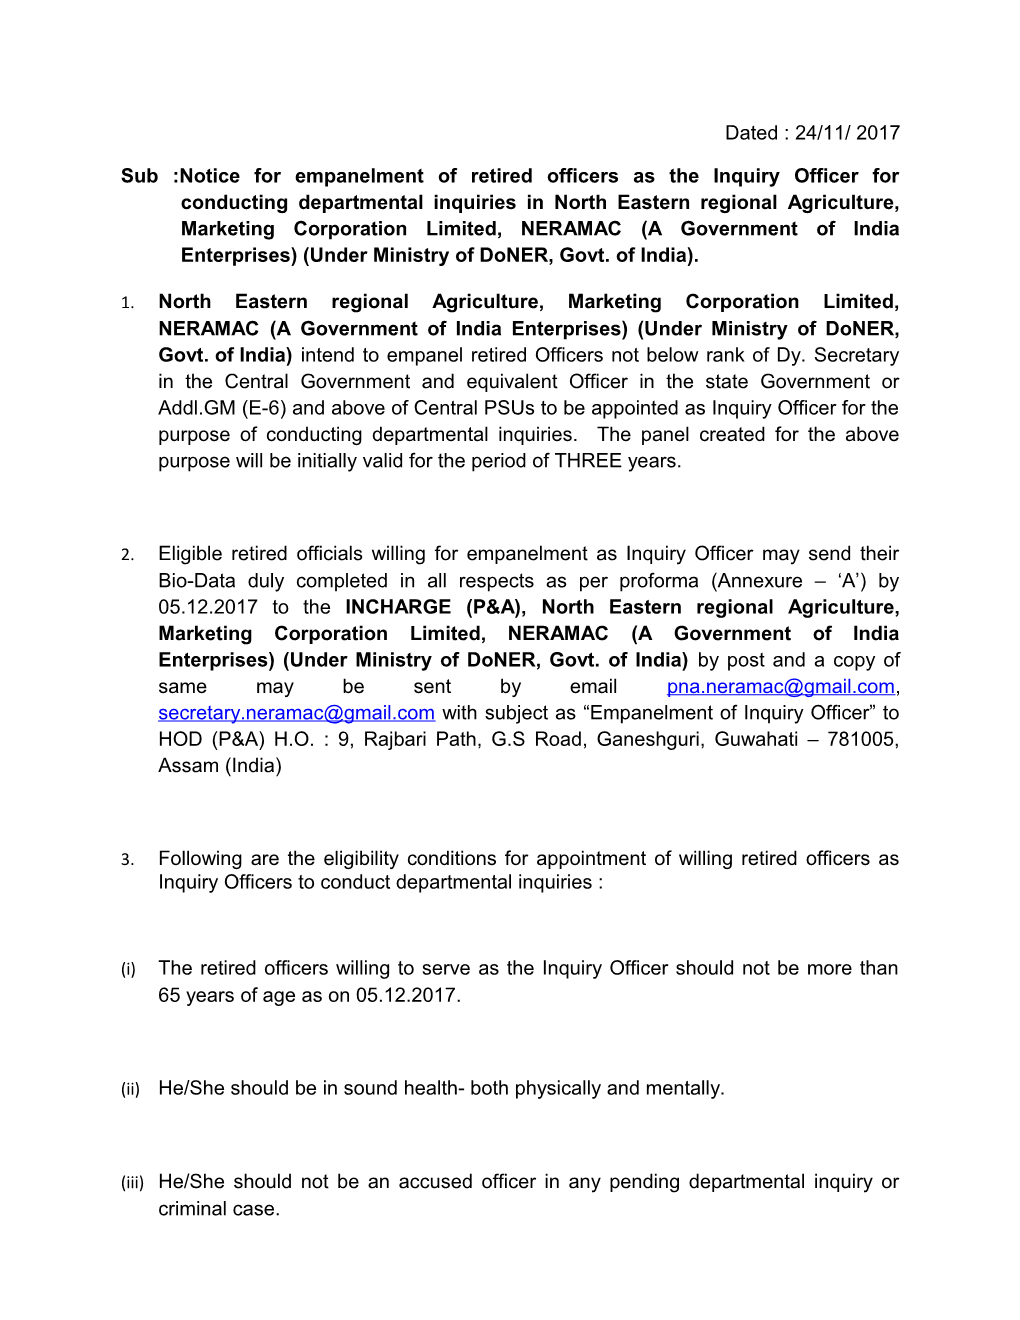 Sub :Notice for Empanelment of Retired Officers As the Inquiry Officer for Conducting